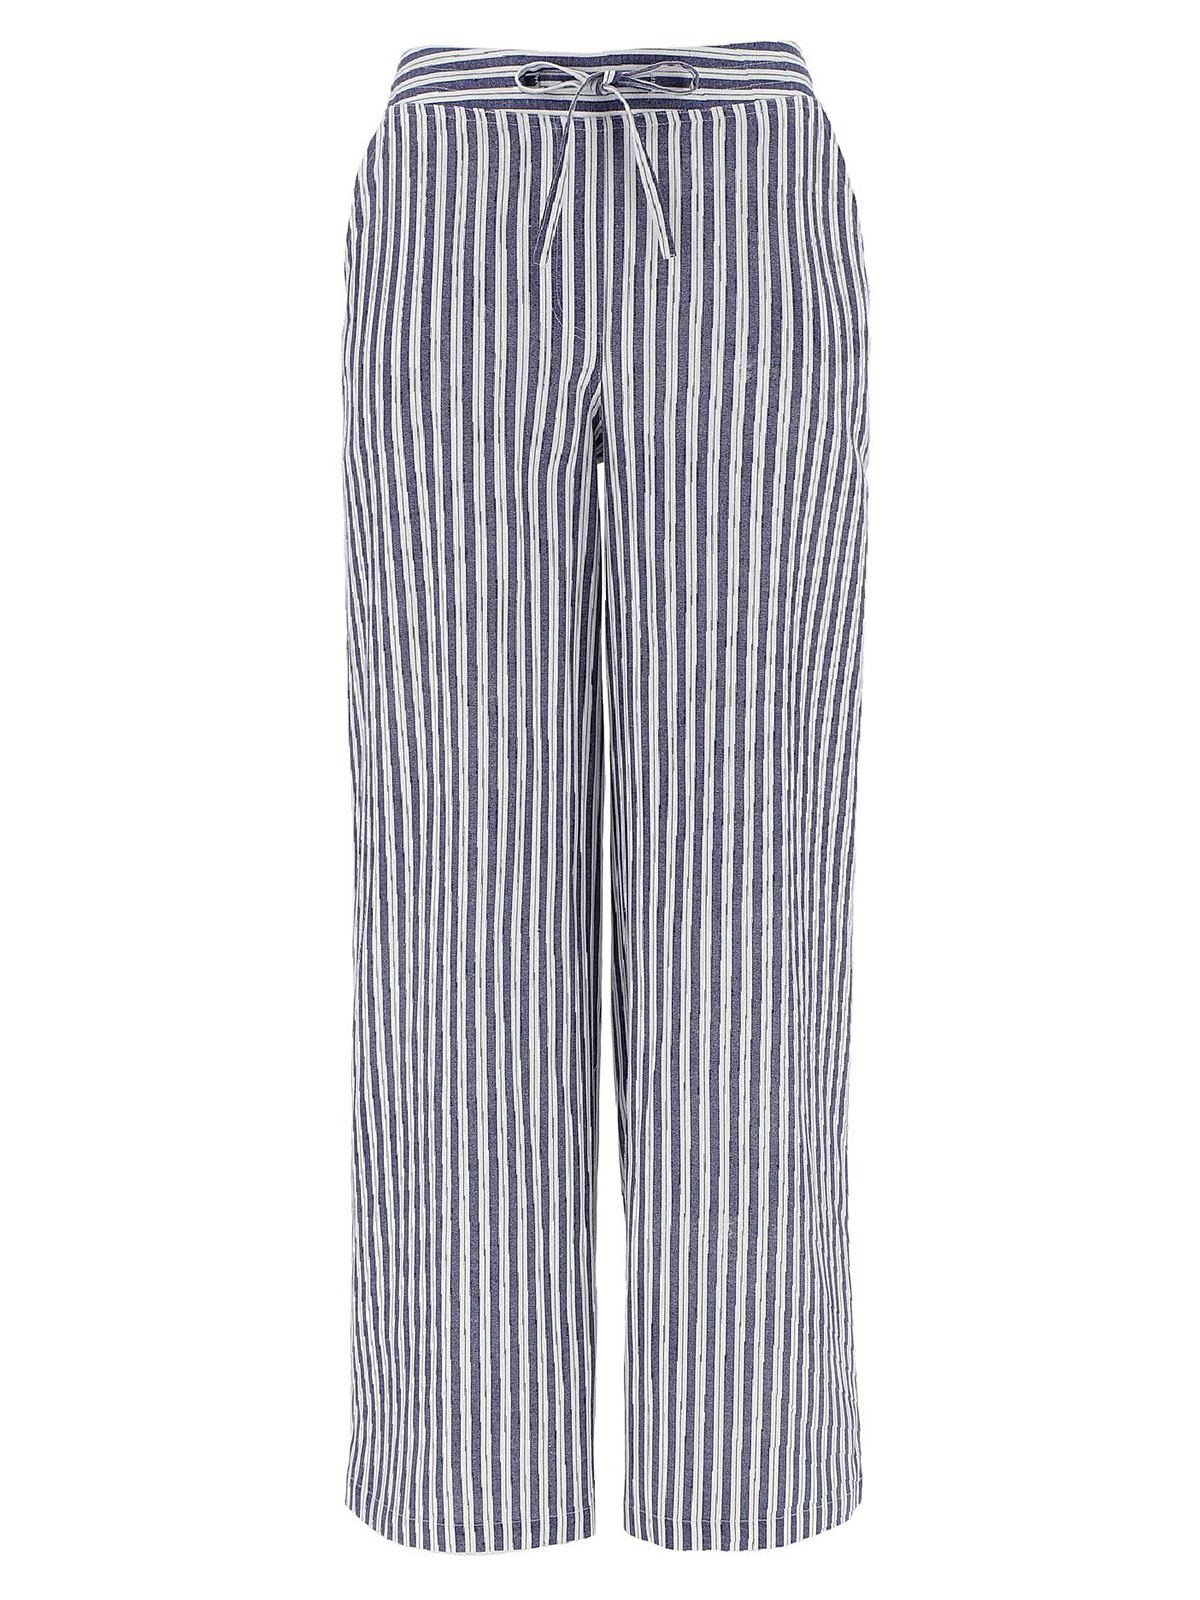 Capsule Capsule Blue White Linen Blend Striped Easy Care Trousers Plus Size 14 To 32